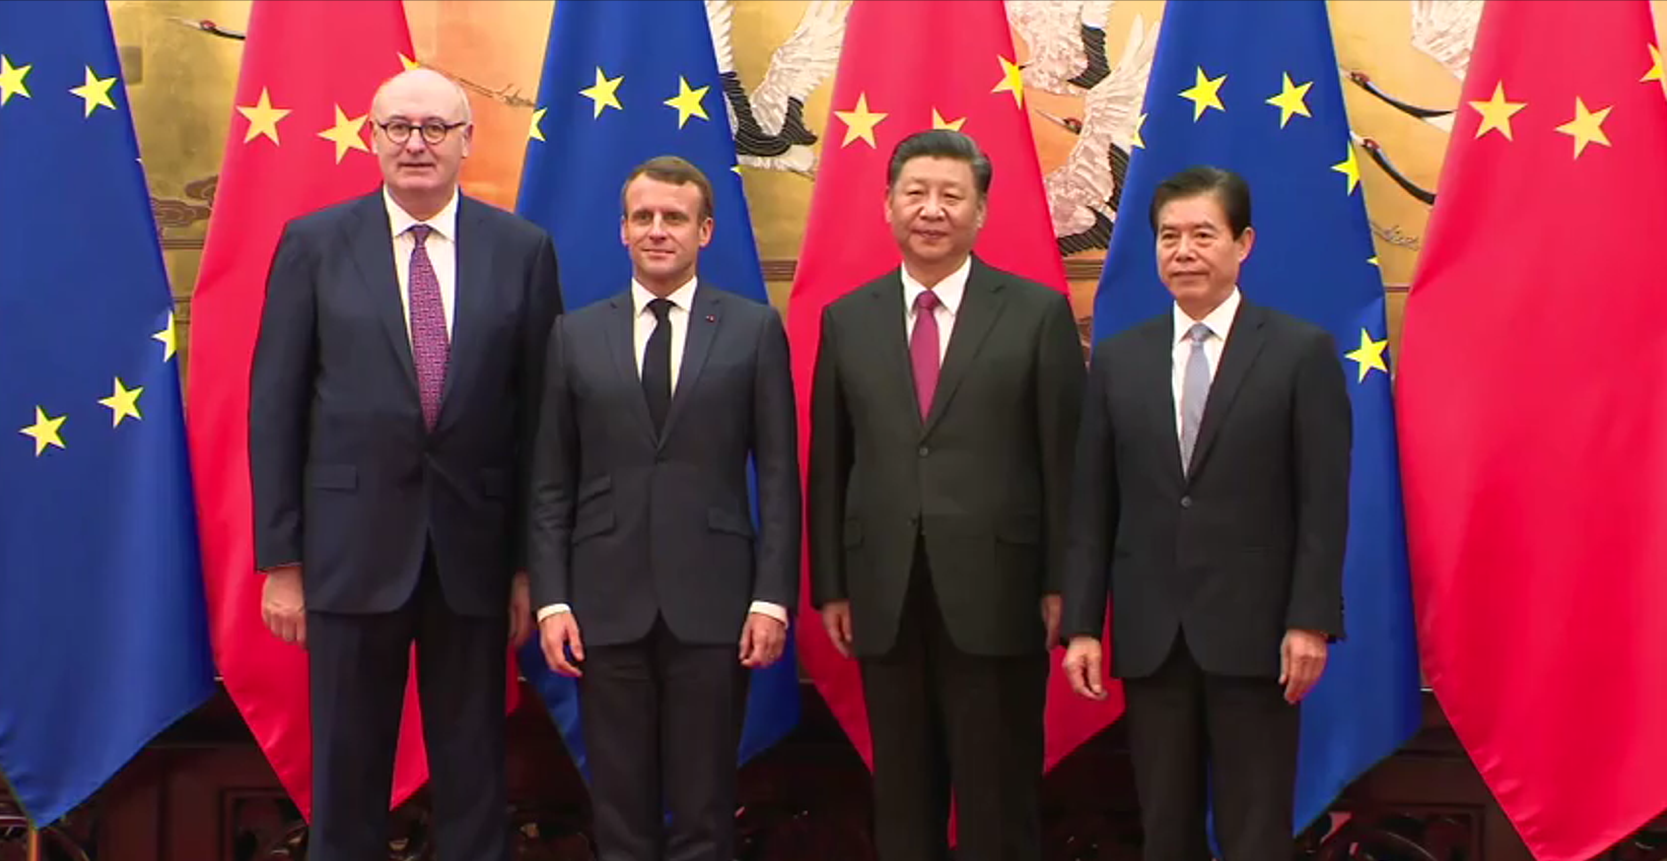 Ceremony to mark the conclusion of negotiations for the EU-China Geographical Indications agreement